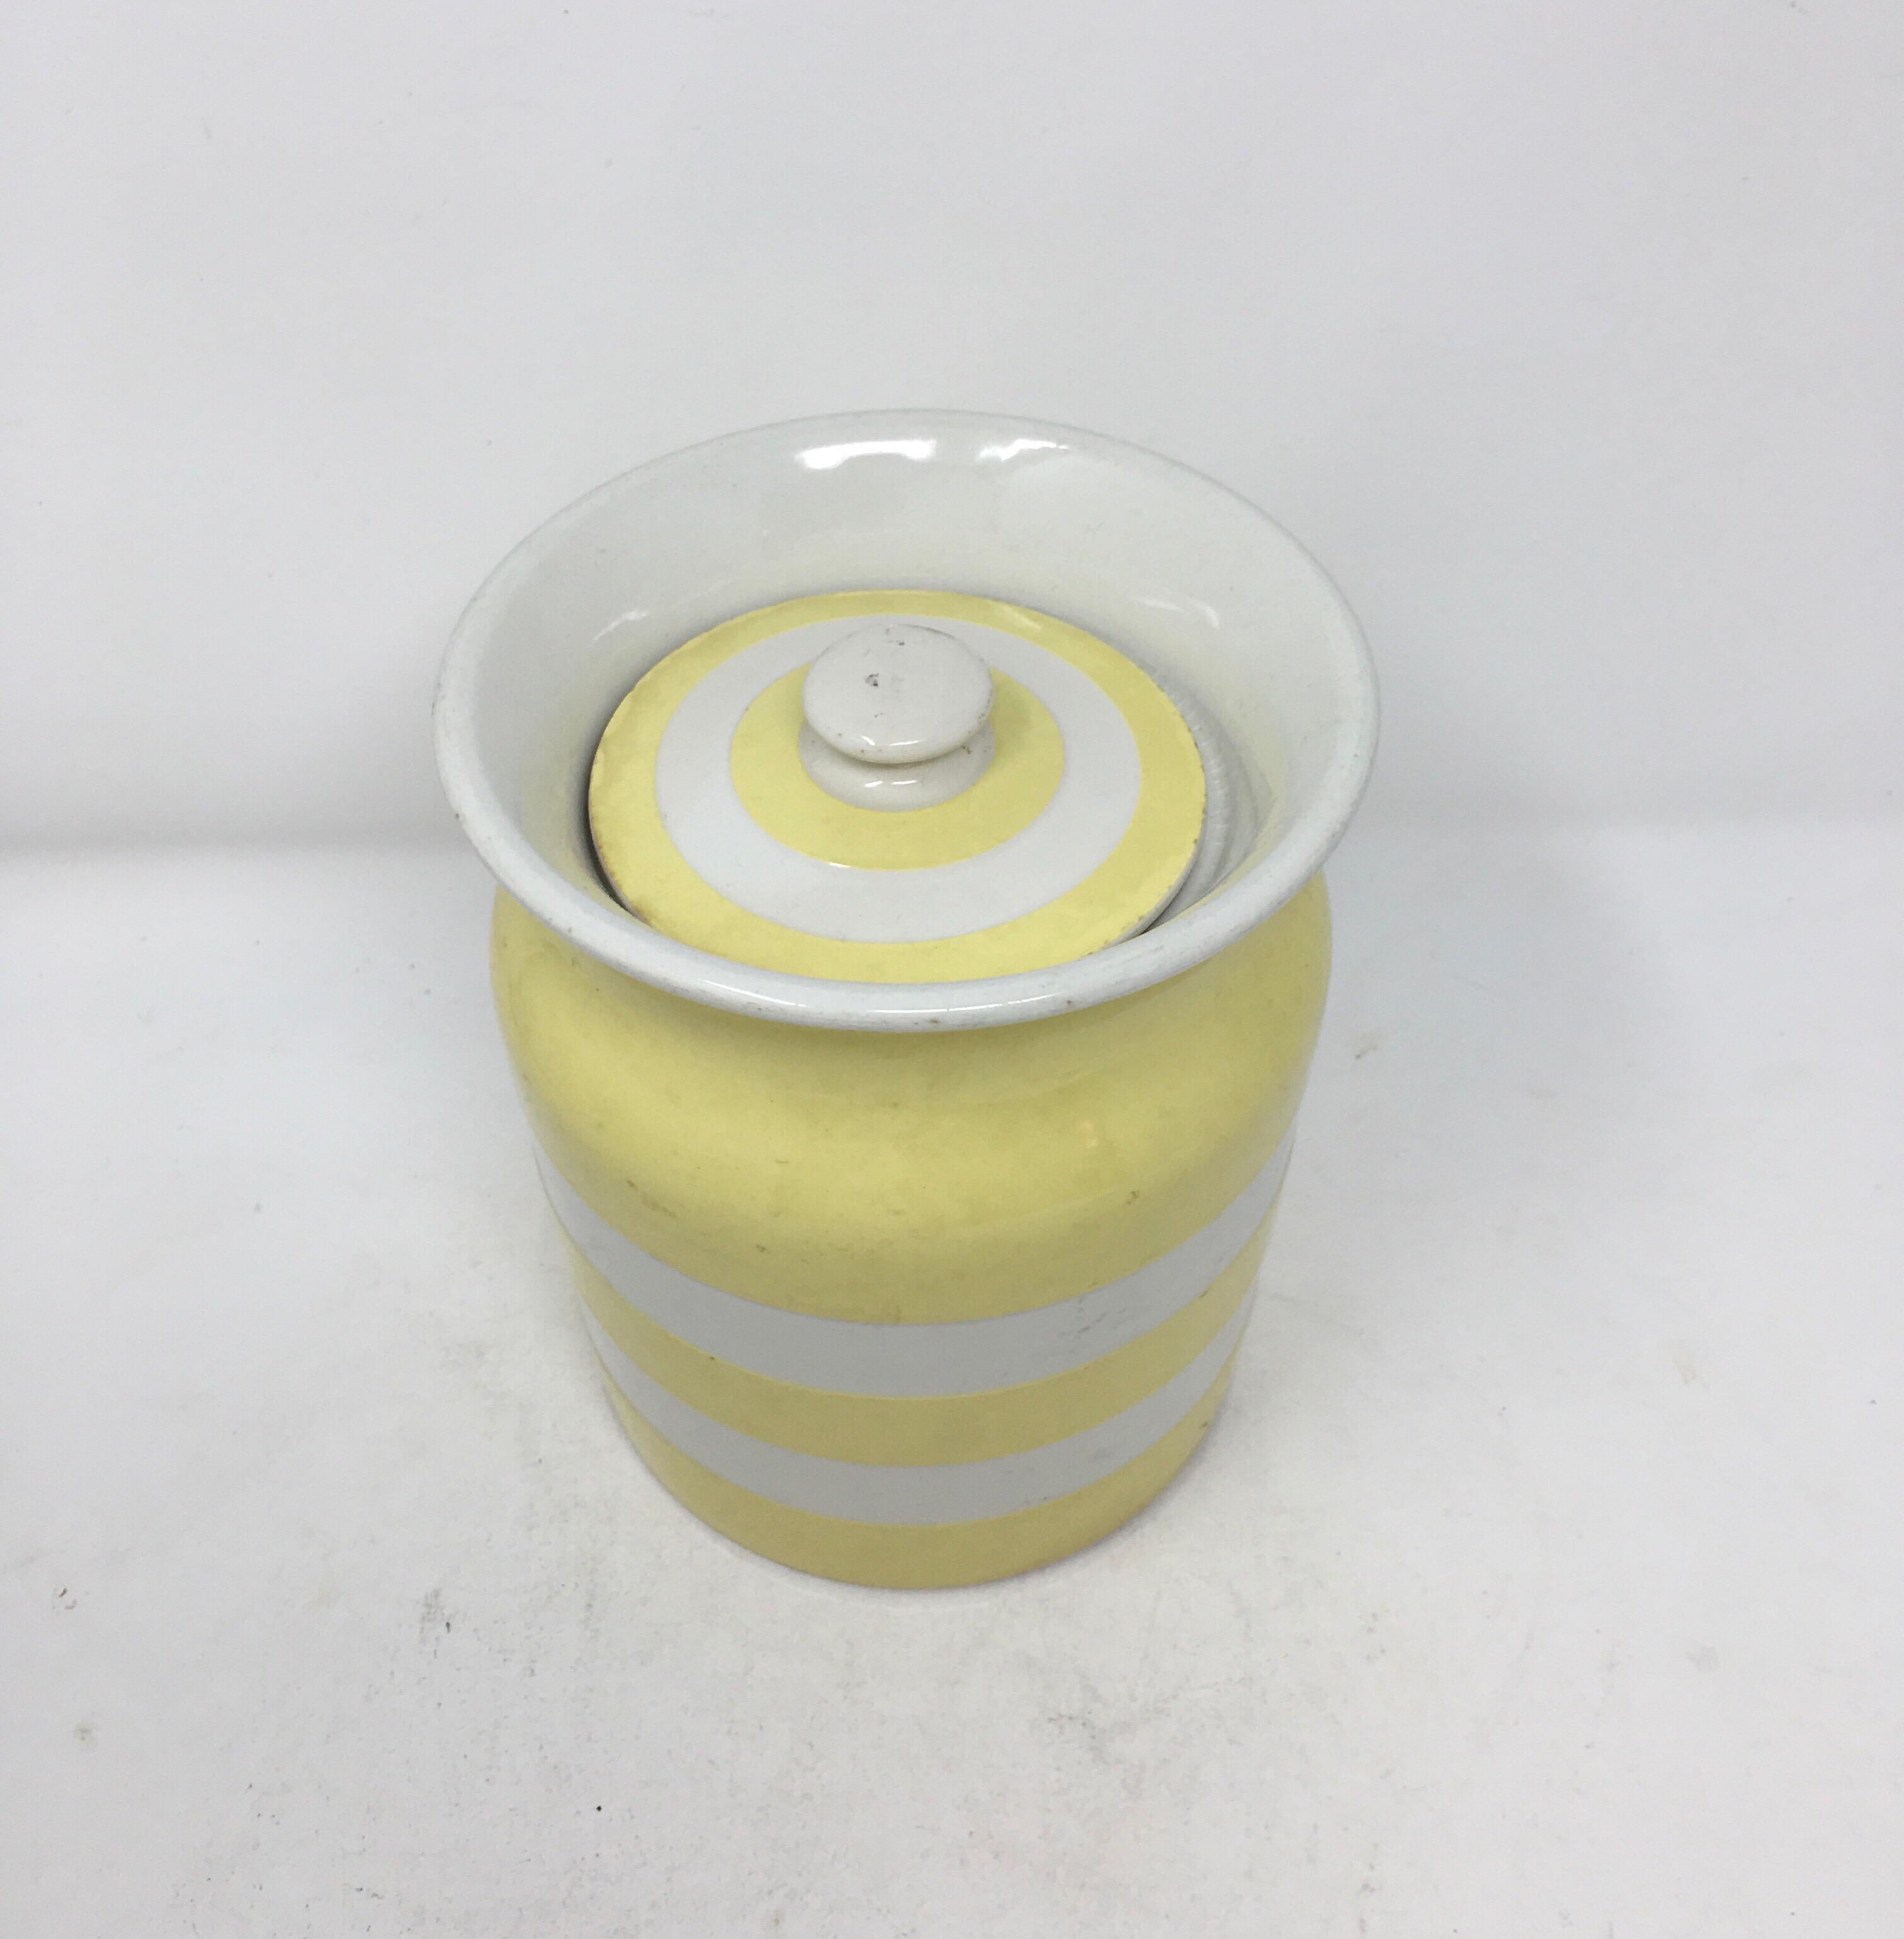 Found in England, this medium size Cornish Kitchen Ware ceramic storage cannister with lid is from makers TG Green, and is in the much rarer yellow color (most often you see these in blue). Made between the 1930s-1950s, this original vintage jar